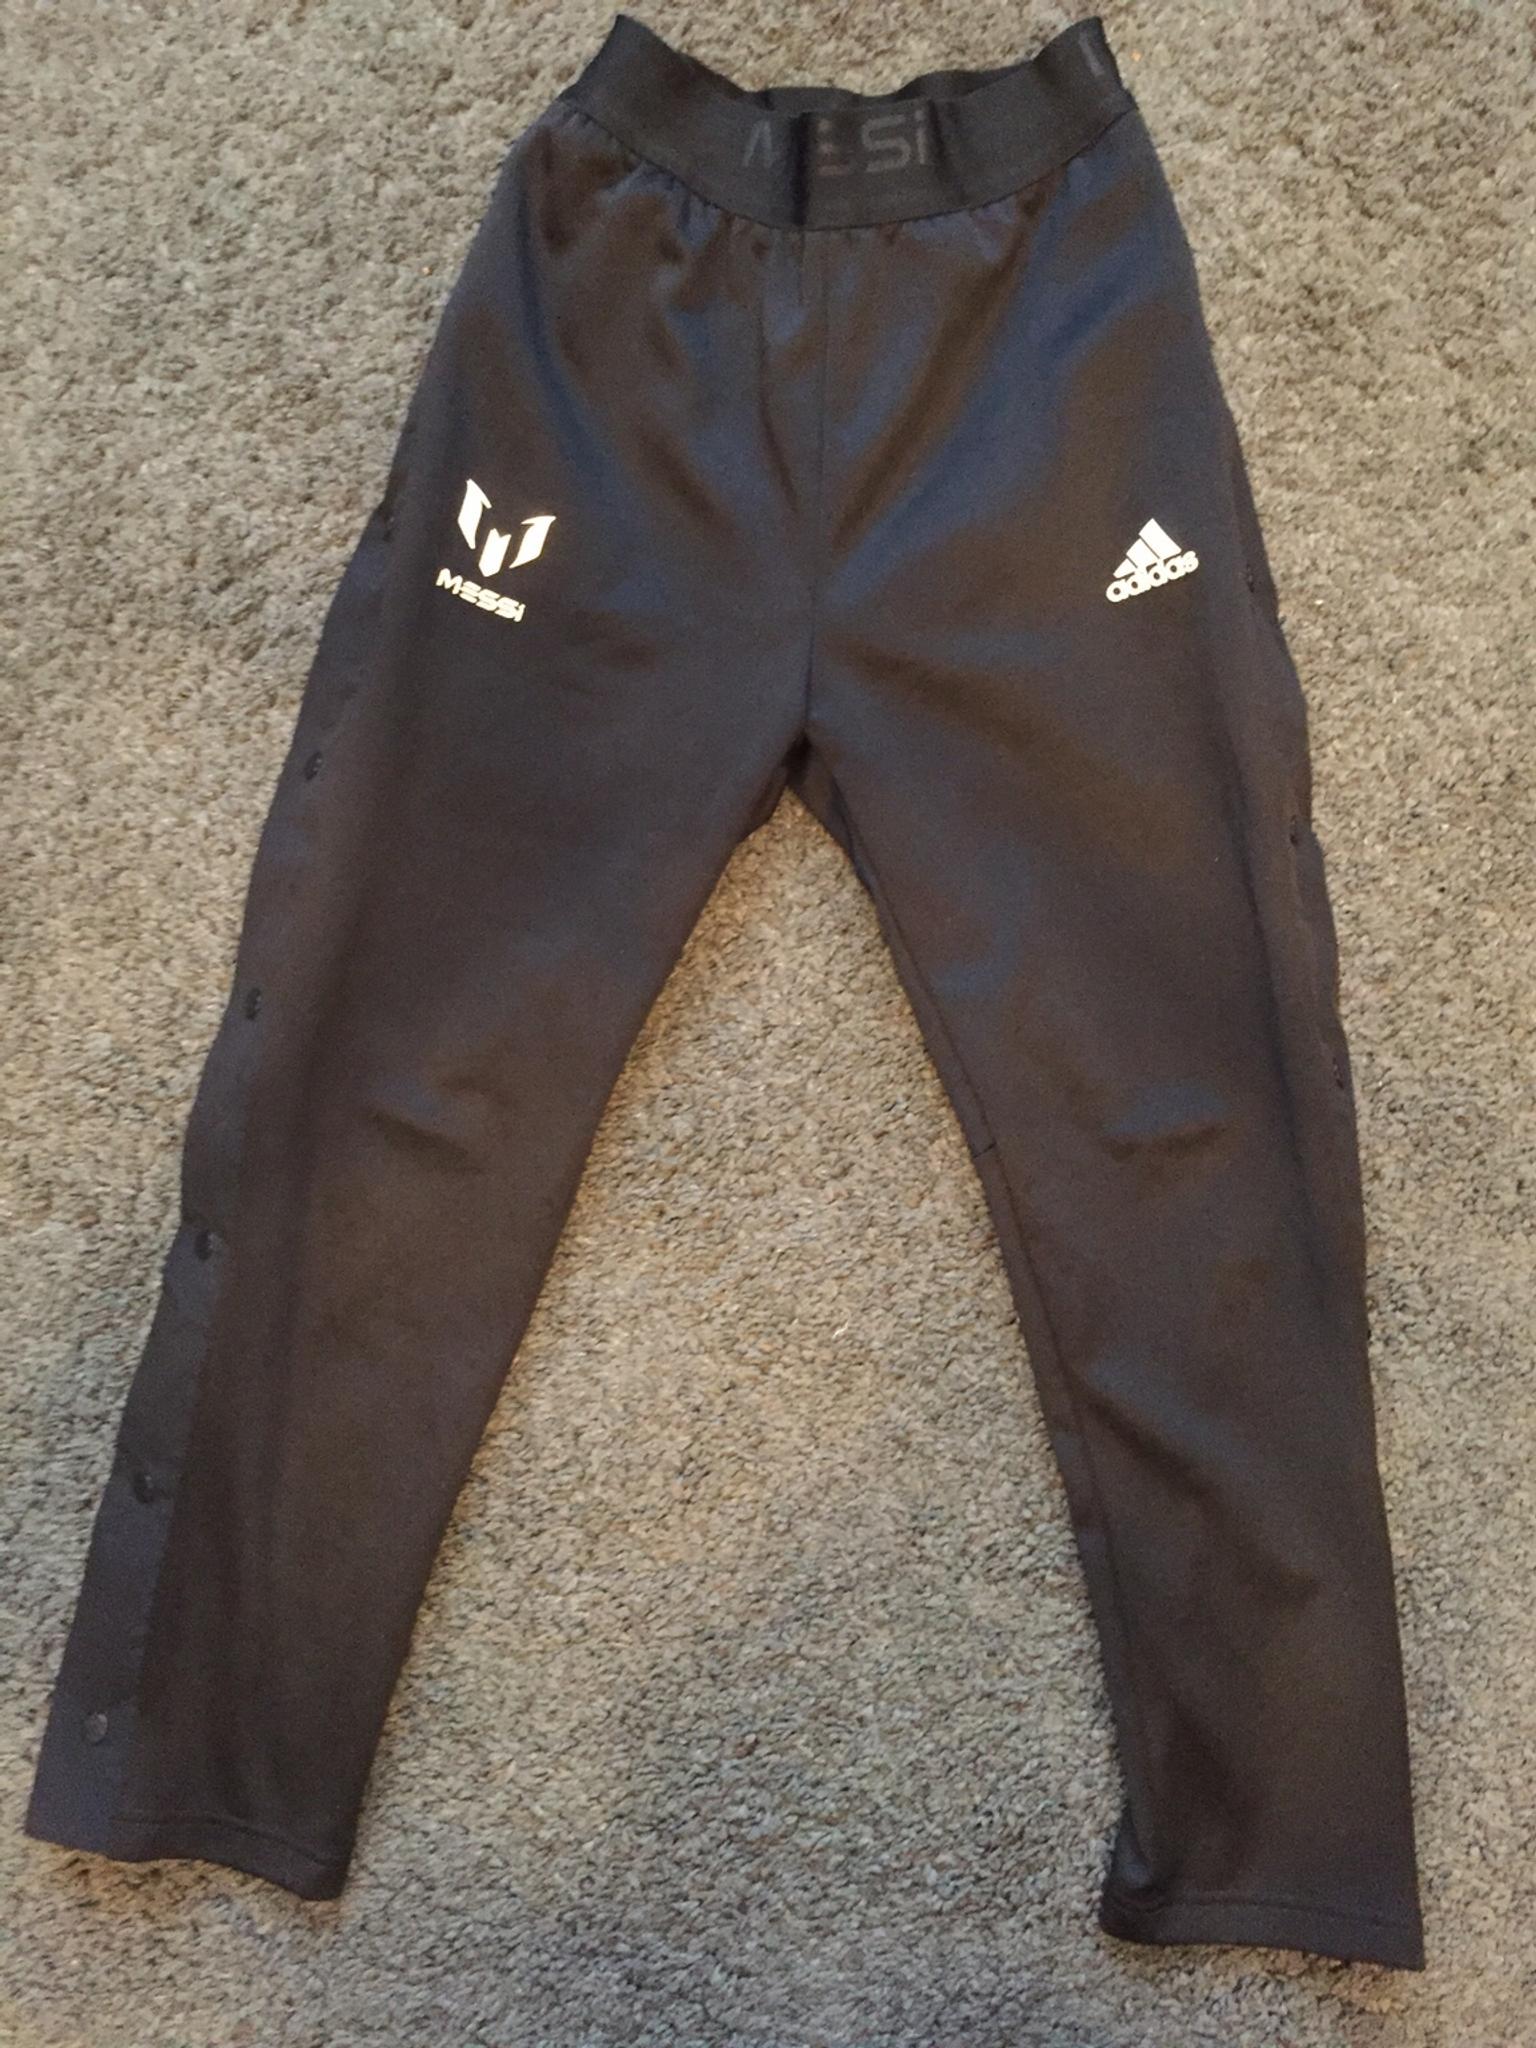 messi tracksuit bottoms